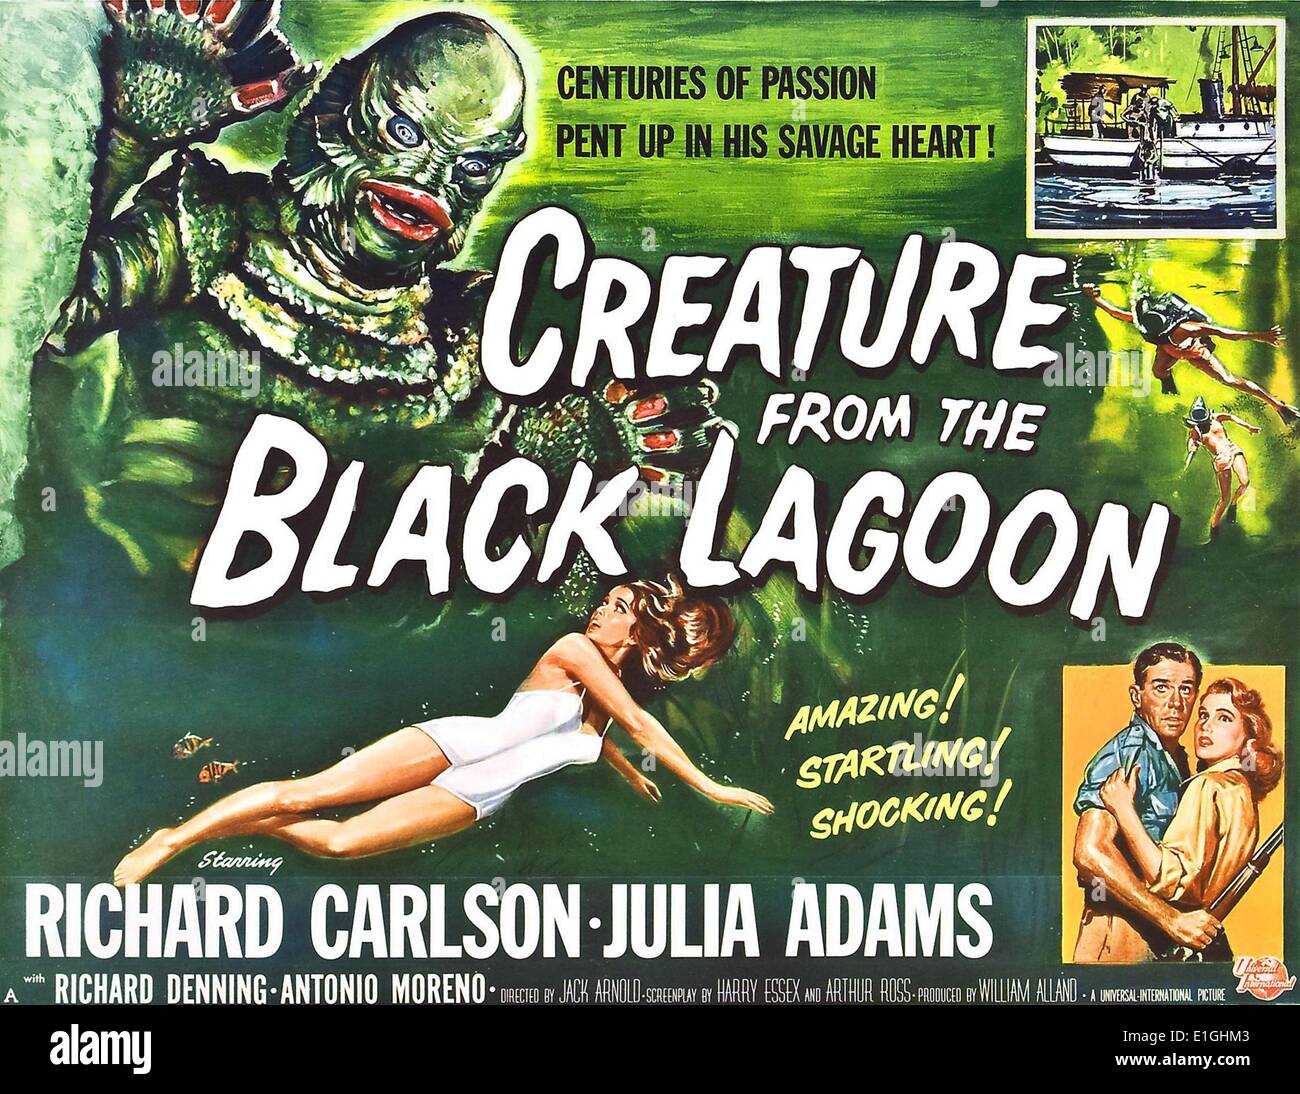 Creature from the Black Lagoon a 1954 monster horror 3-D film in black and white starring Richard Carlson and Julia Adams. Stock Photo